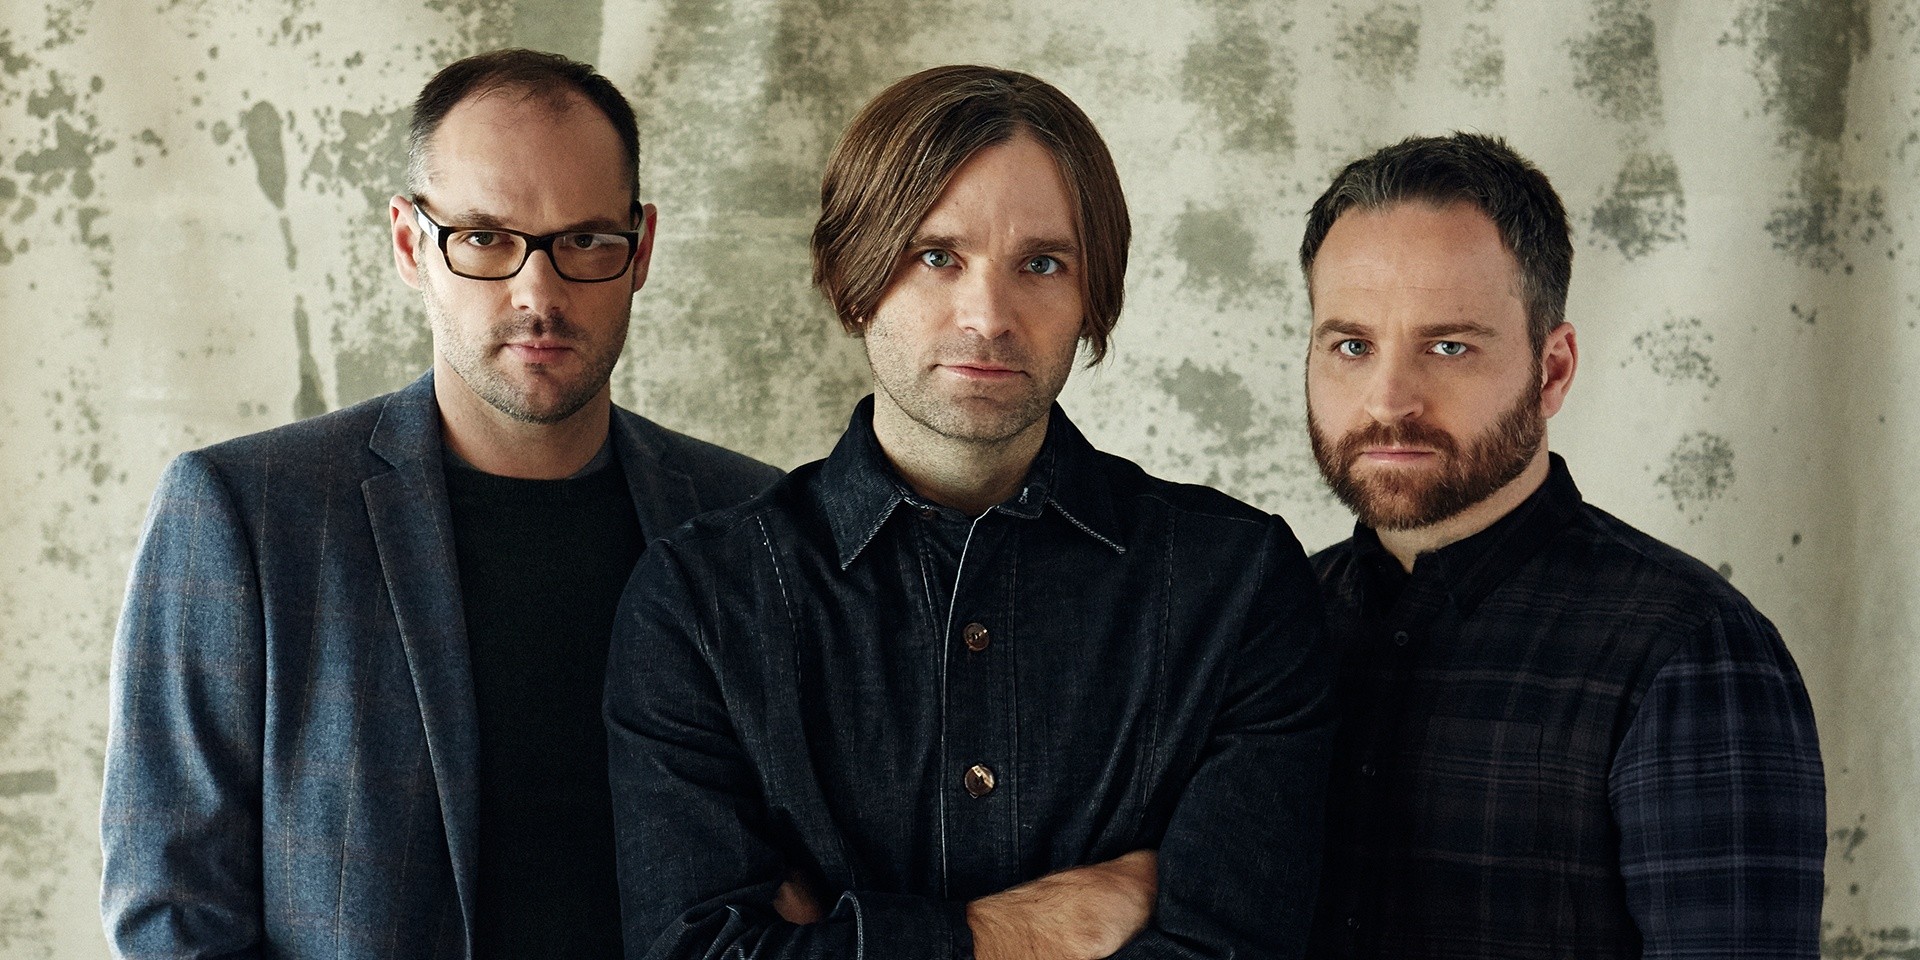 WATCH: Death Cab for Cutie's Jason McGerr talks about "humbling" Asian tours, moving forward and more